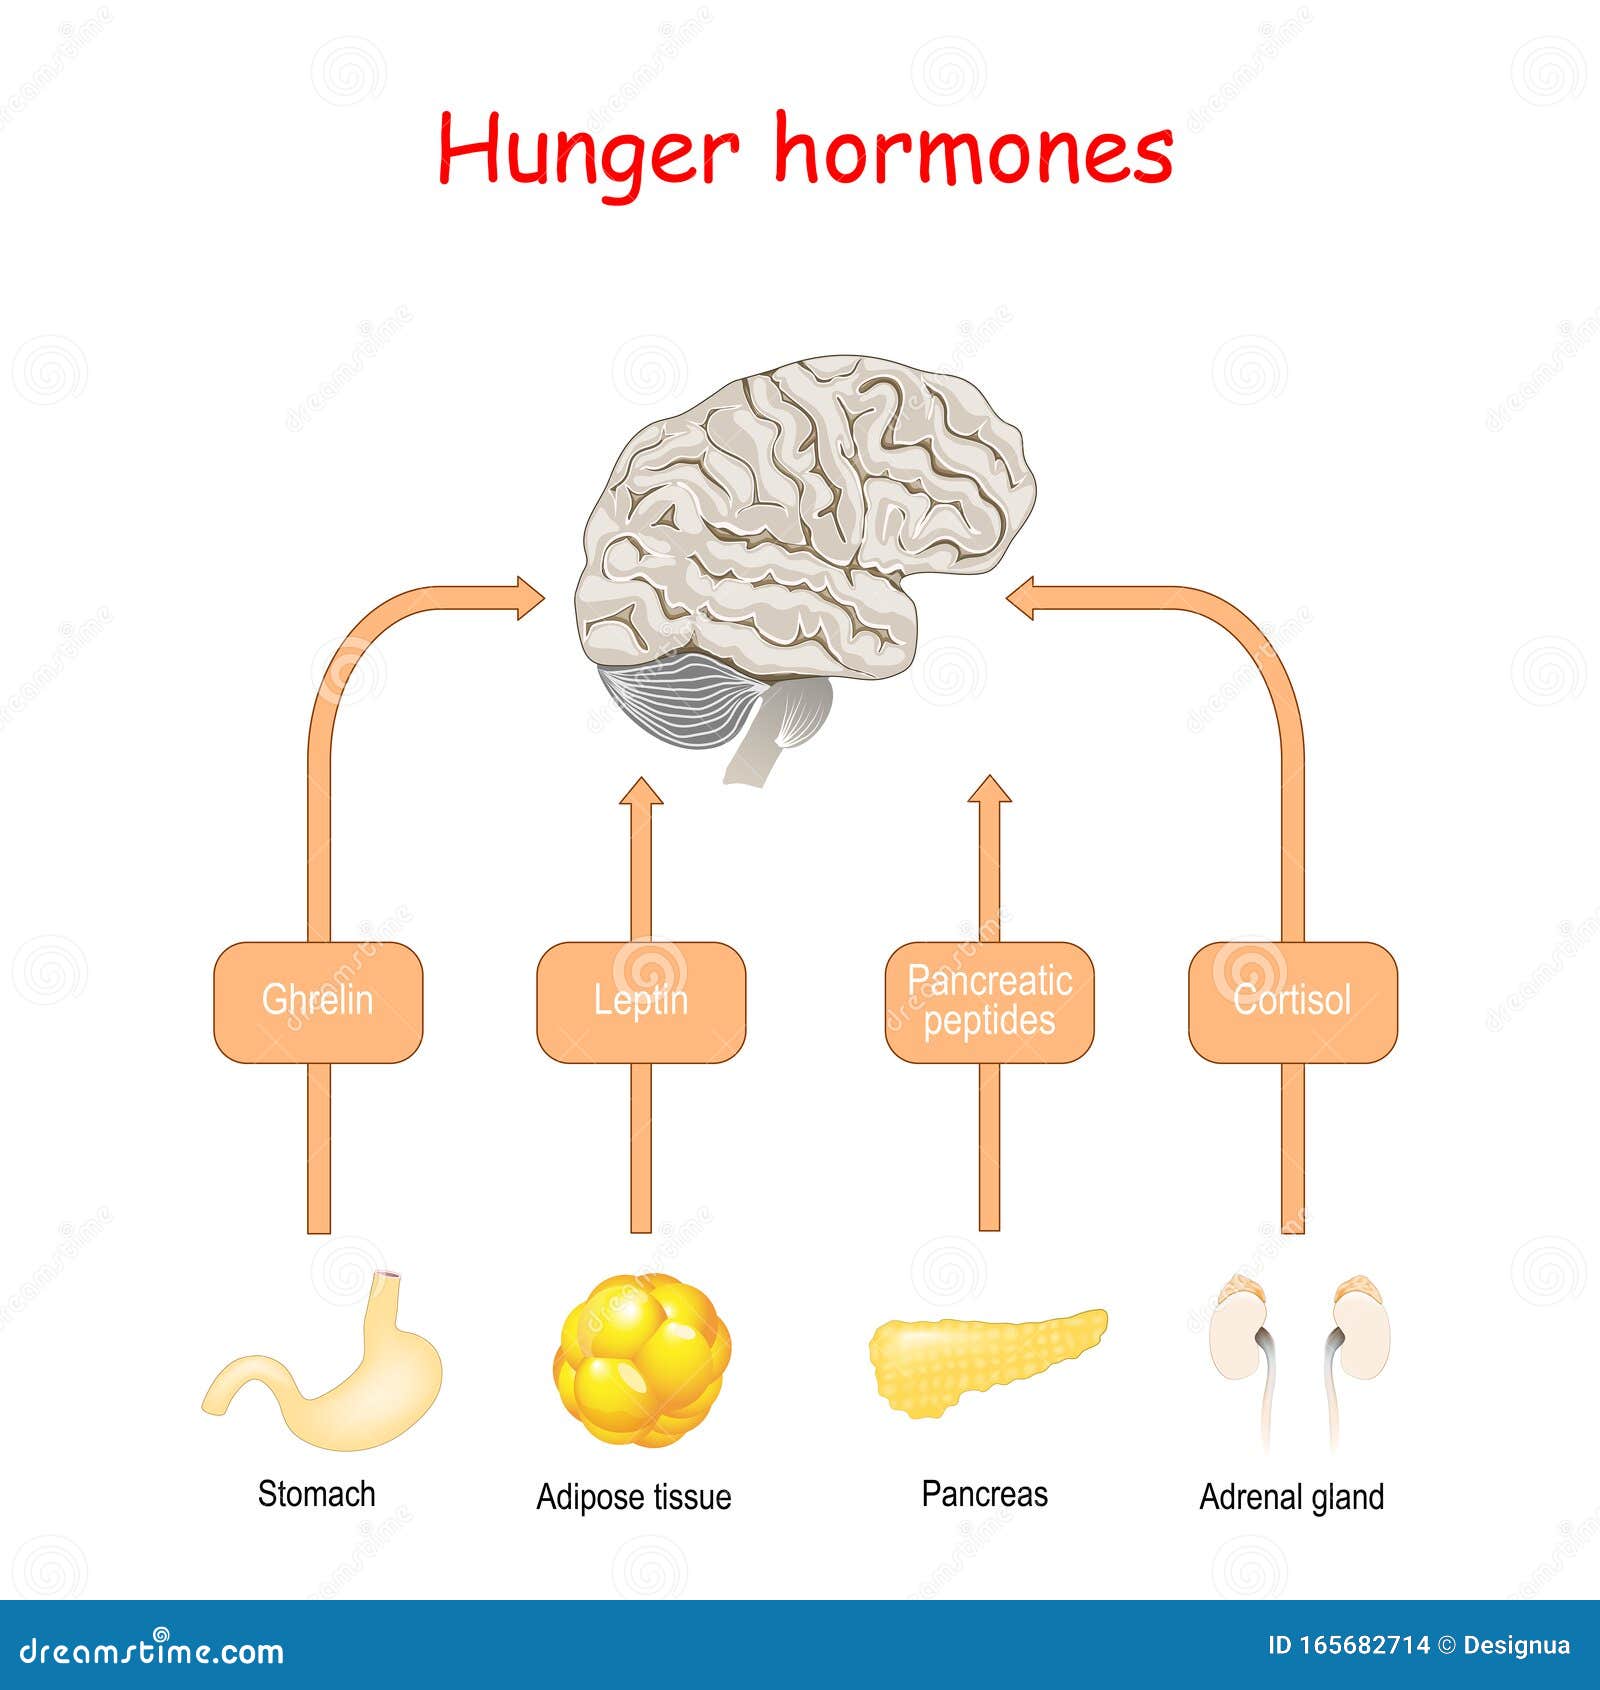 hunger hormones and appetite. cortisol, pancreatic peptides, ghrelin, and leptin